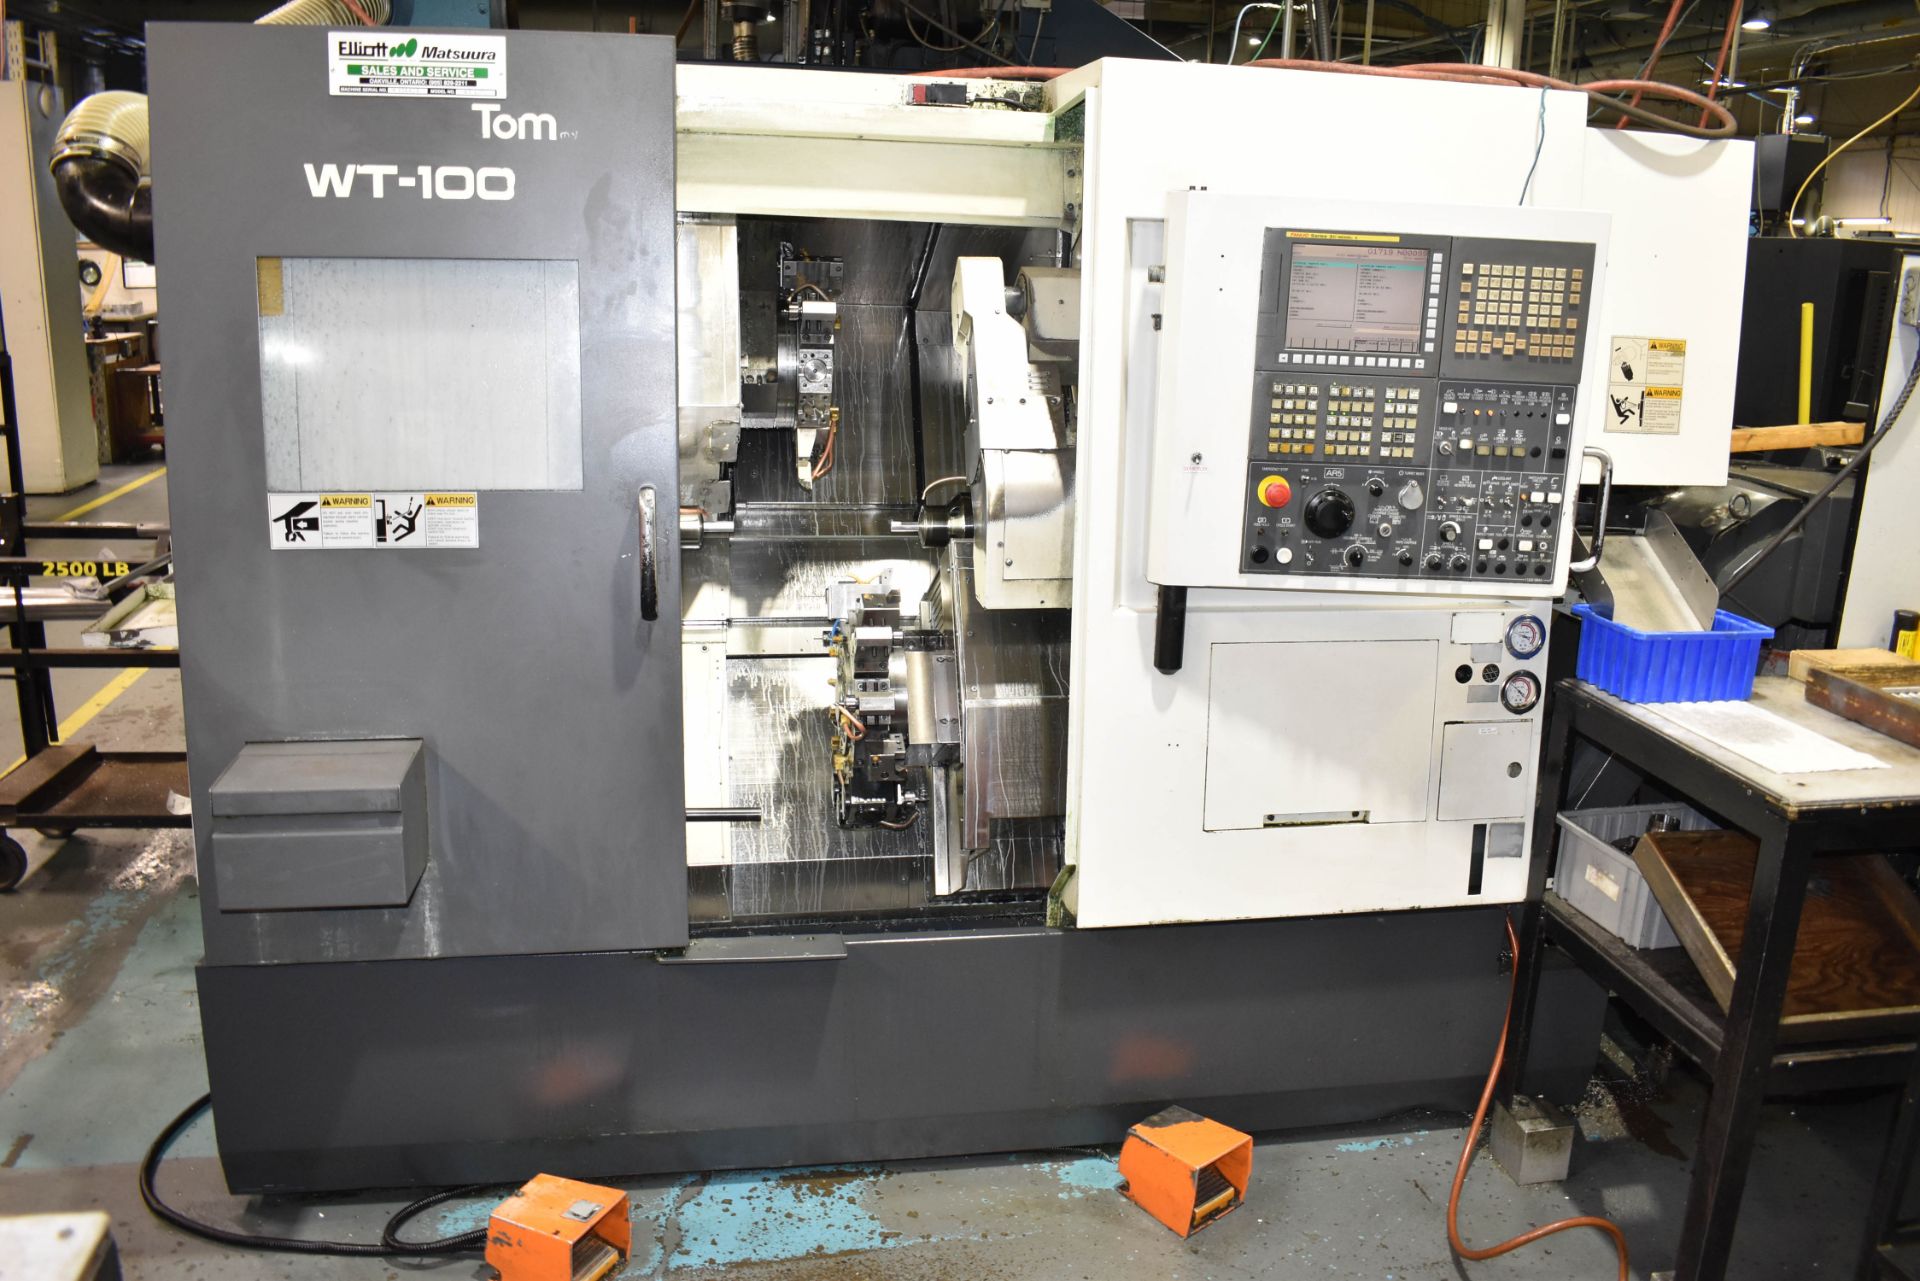 NAKAMURA-TOME WT-100 MULTI-AXIS OPPOSED SPINDLE AND TWIN TURRET CNC MULTI-TASKING CENTER WITH